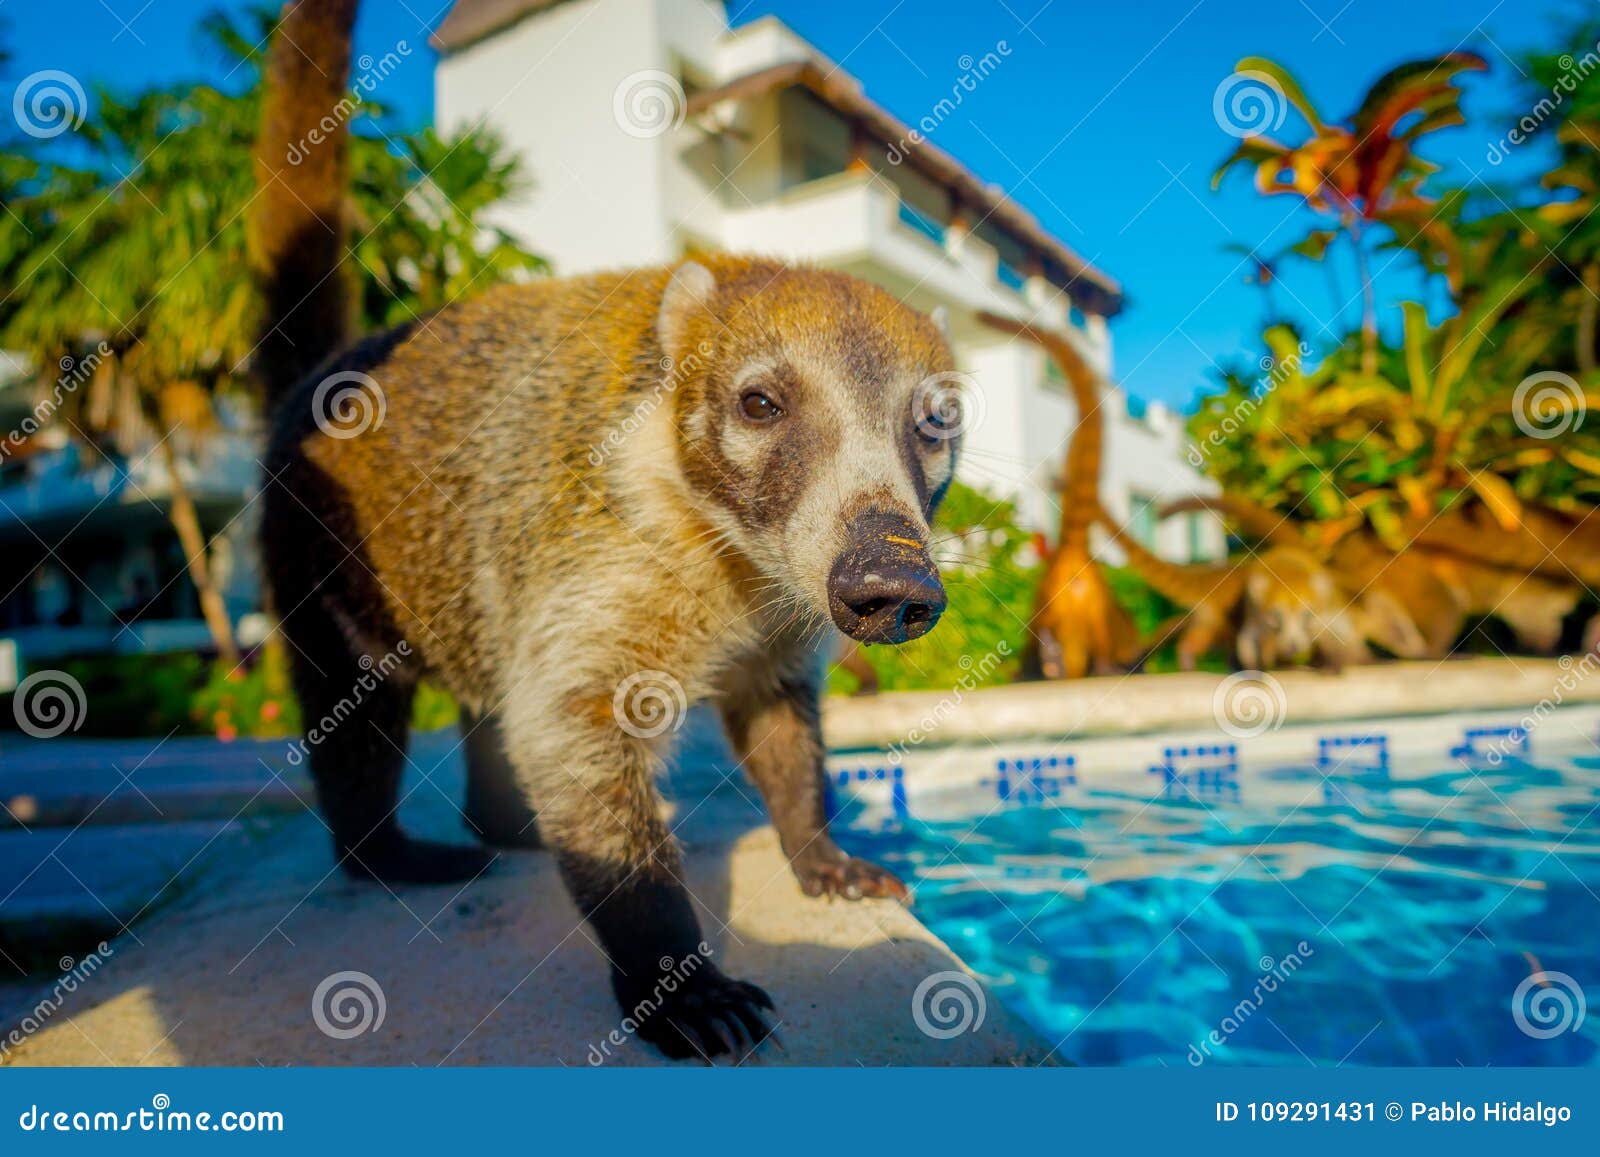 Portrait of a of Small Mammals Walking Around of a Swimming Pool Located  Inside of a Hotel in PLaya Del Carmen at Stock Image - Image of mexican,  island: 109291431